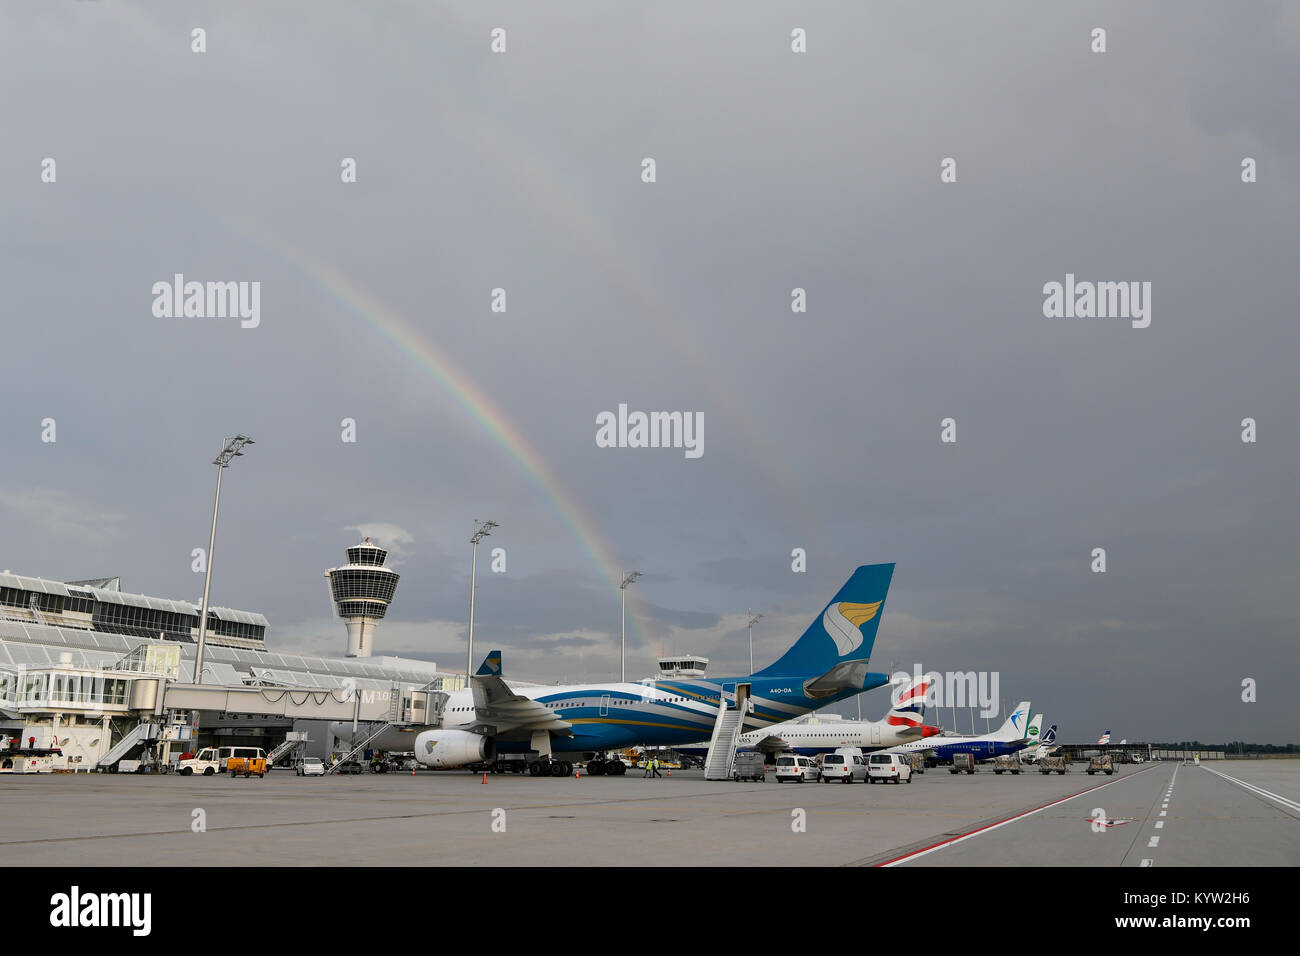 rainbow over Terminal 1, tower, aircraft, airplane, plane, airlines, Munich Airport, Stock Photo